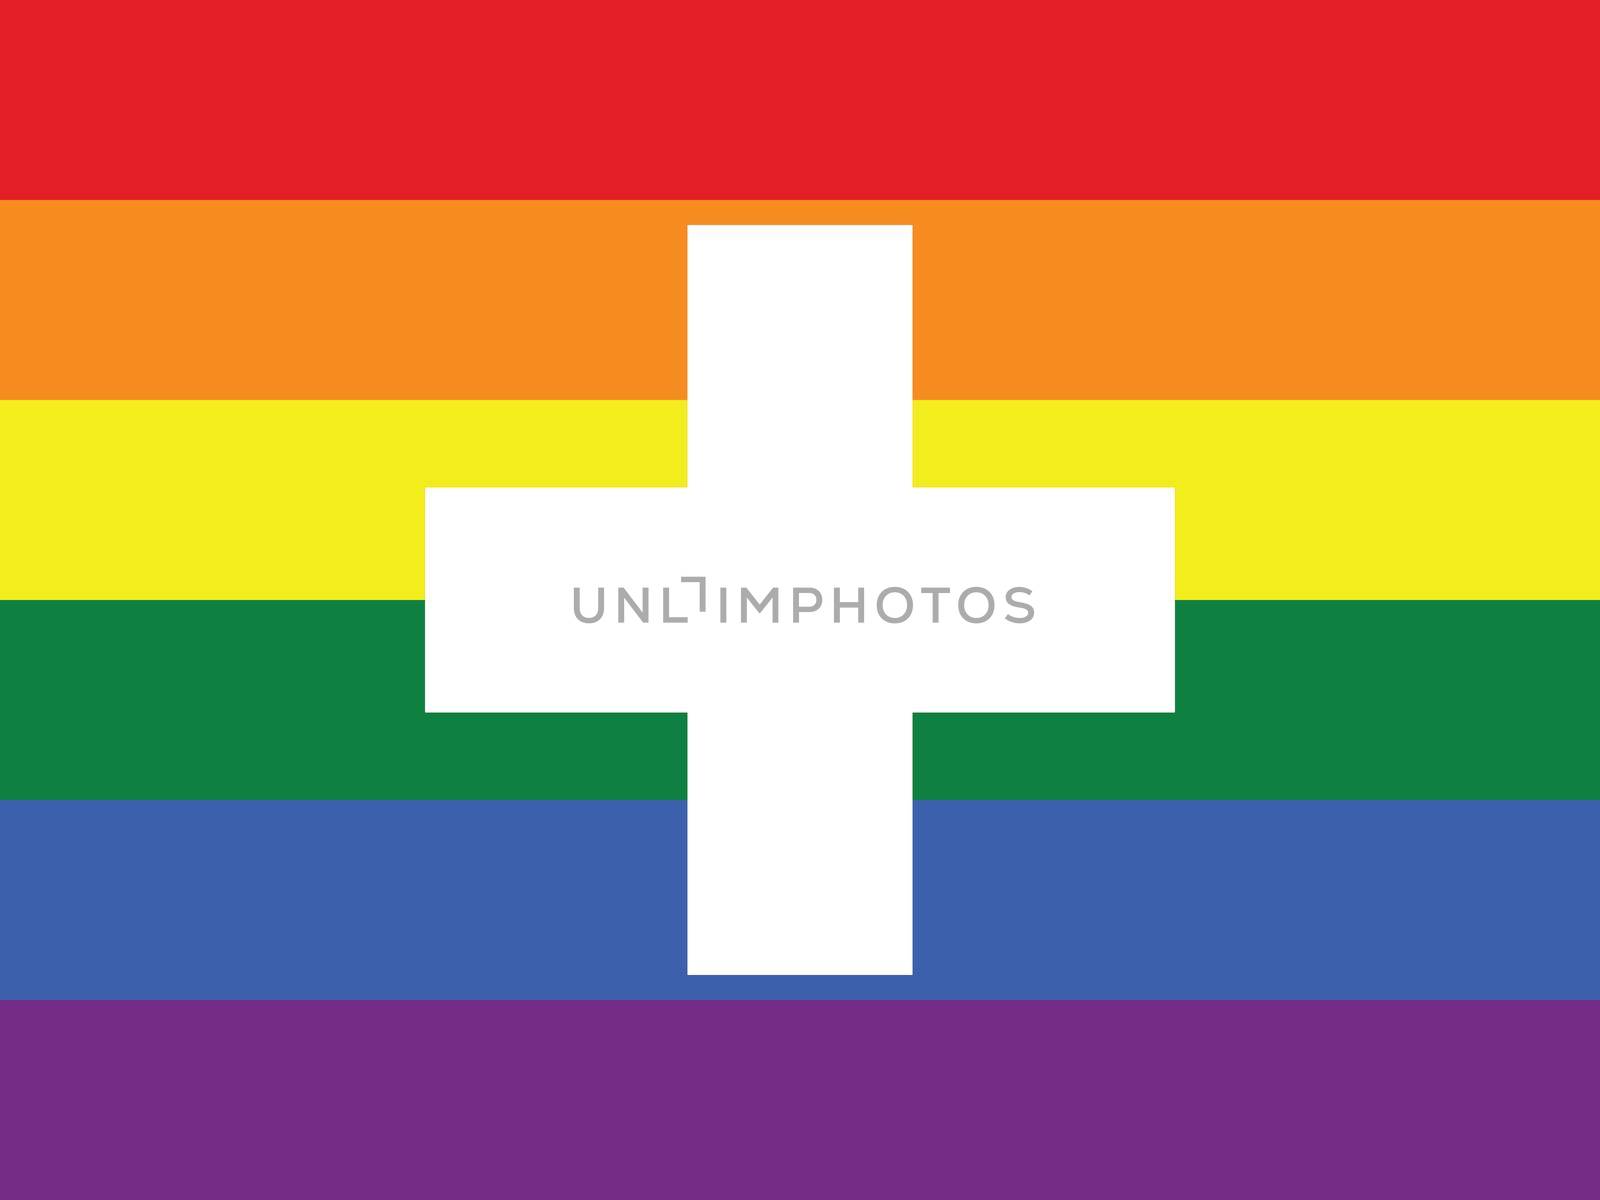 Top view of flag of lgbt, Switzerland, no flagpole. Plane design, layout. Flag background, Freedom and love concept. Pride month. activism, community and freedom